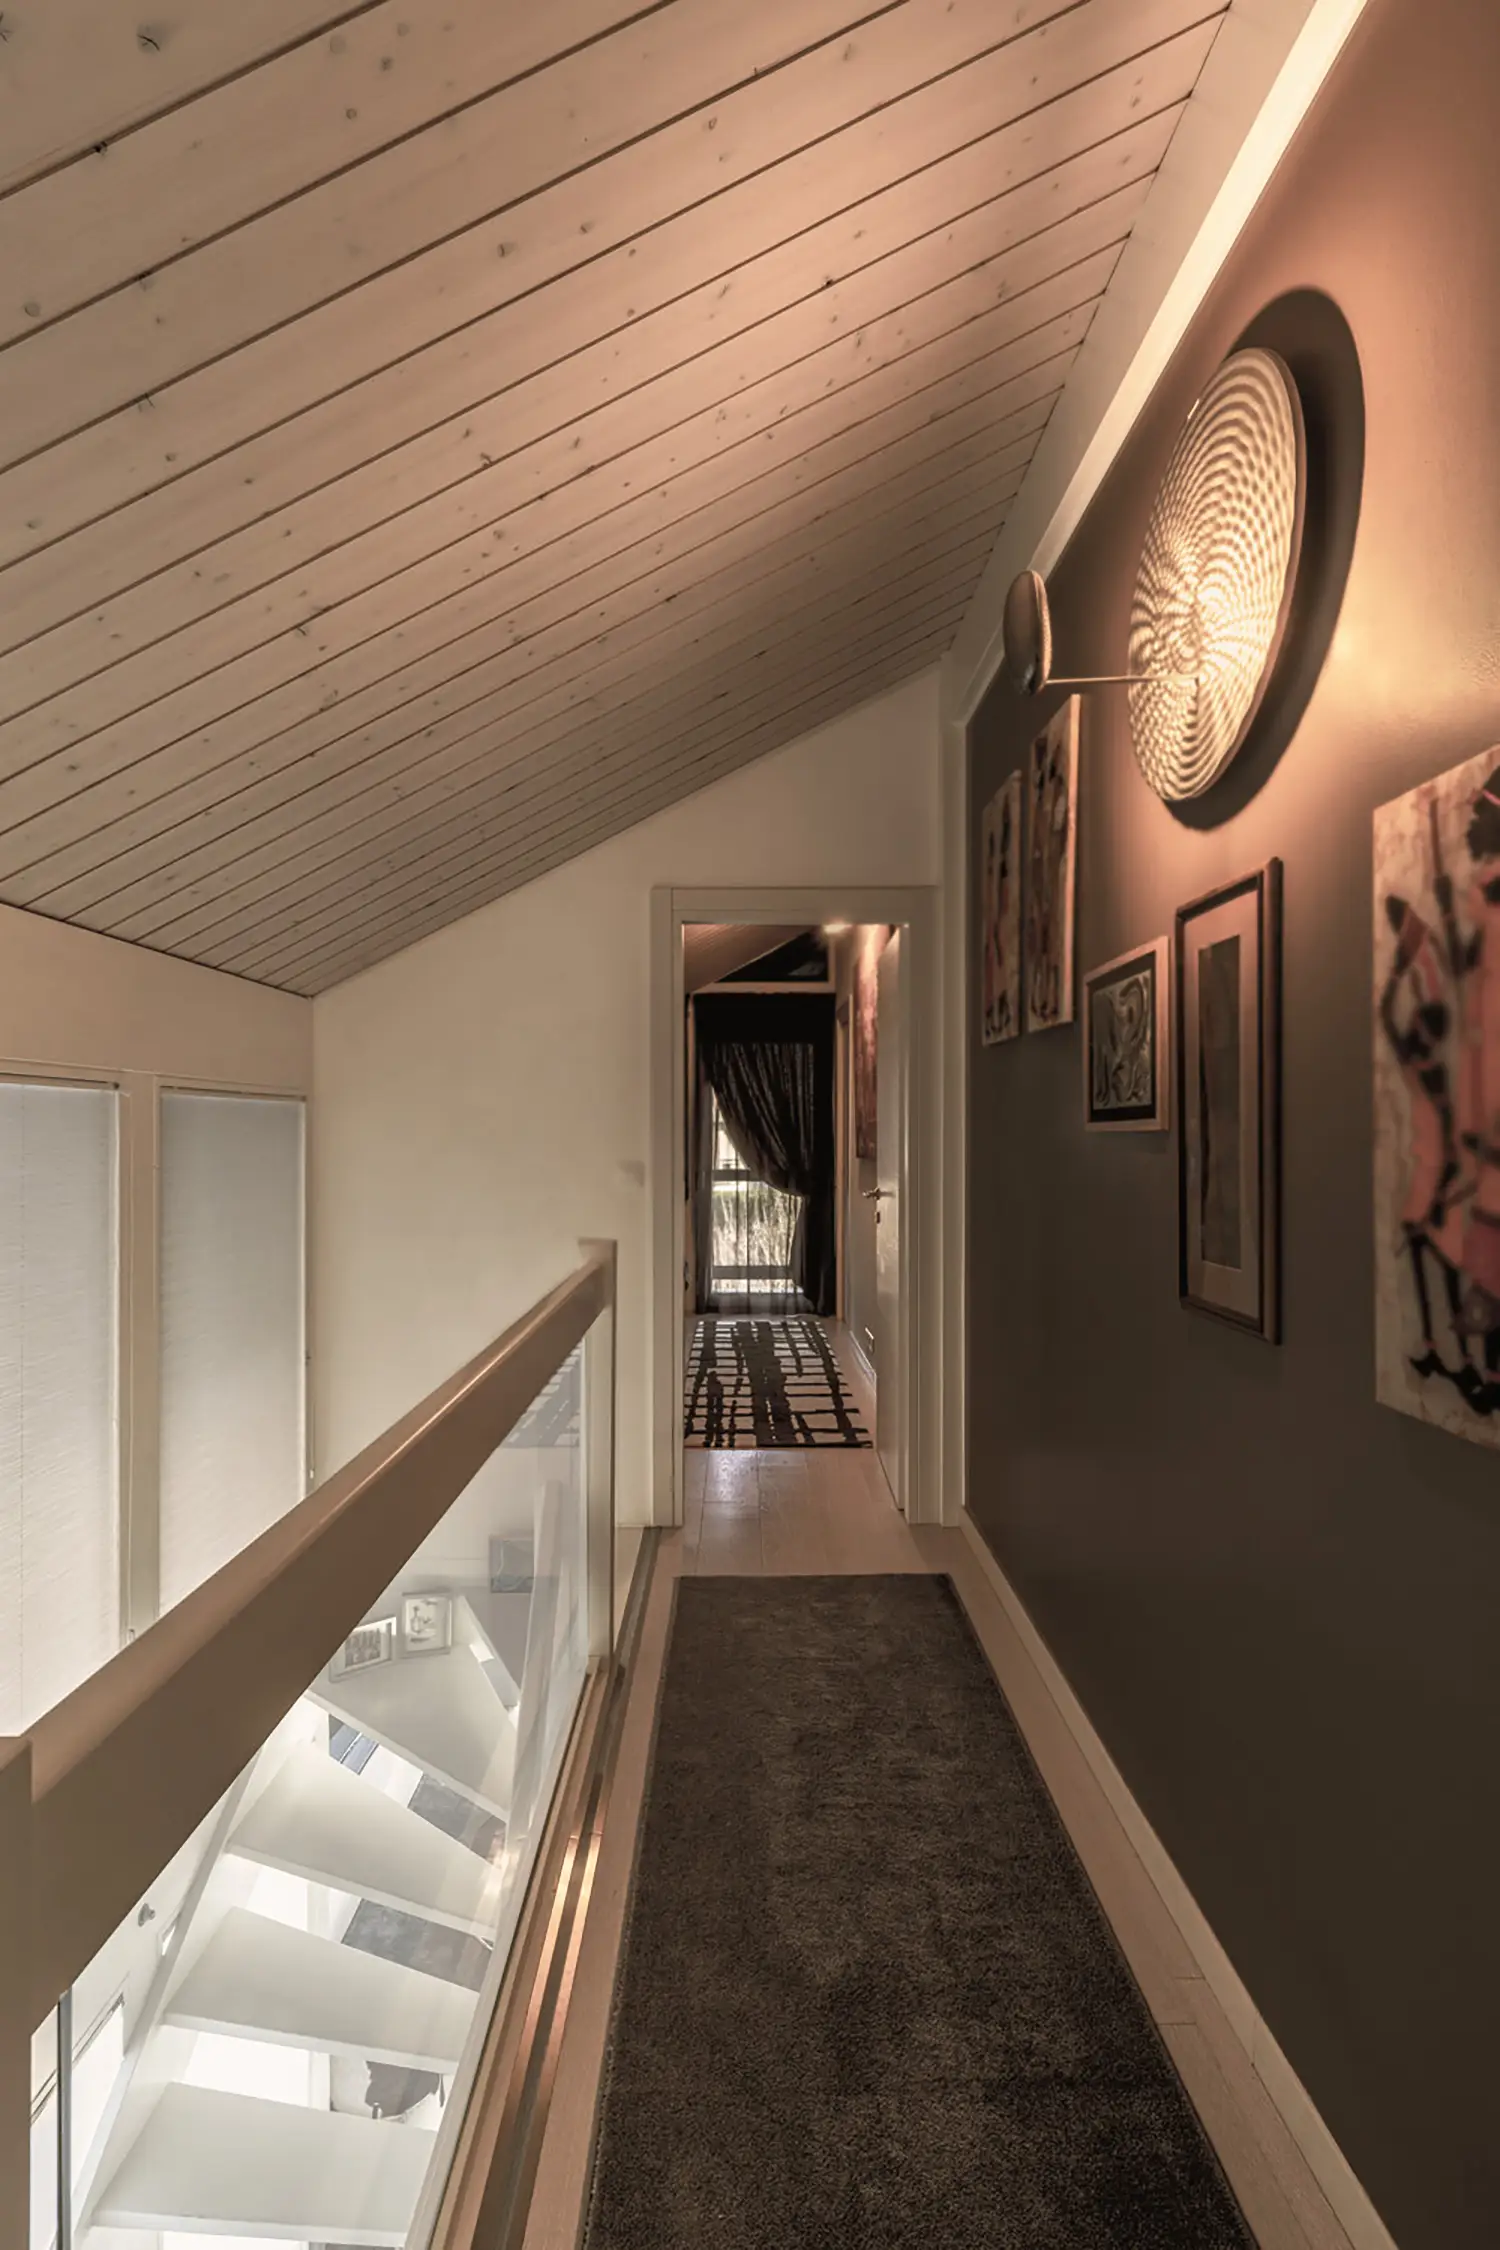 Photo of the first floor staircase and corridor with details of the wall painted in shades of dove grey, the Artemide ceiling light, the grey carpet and the light parquet floor; renovation by studio Elles Interior Design.